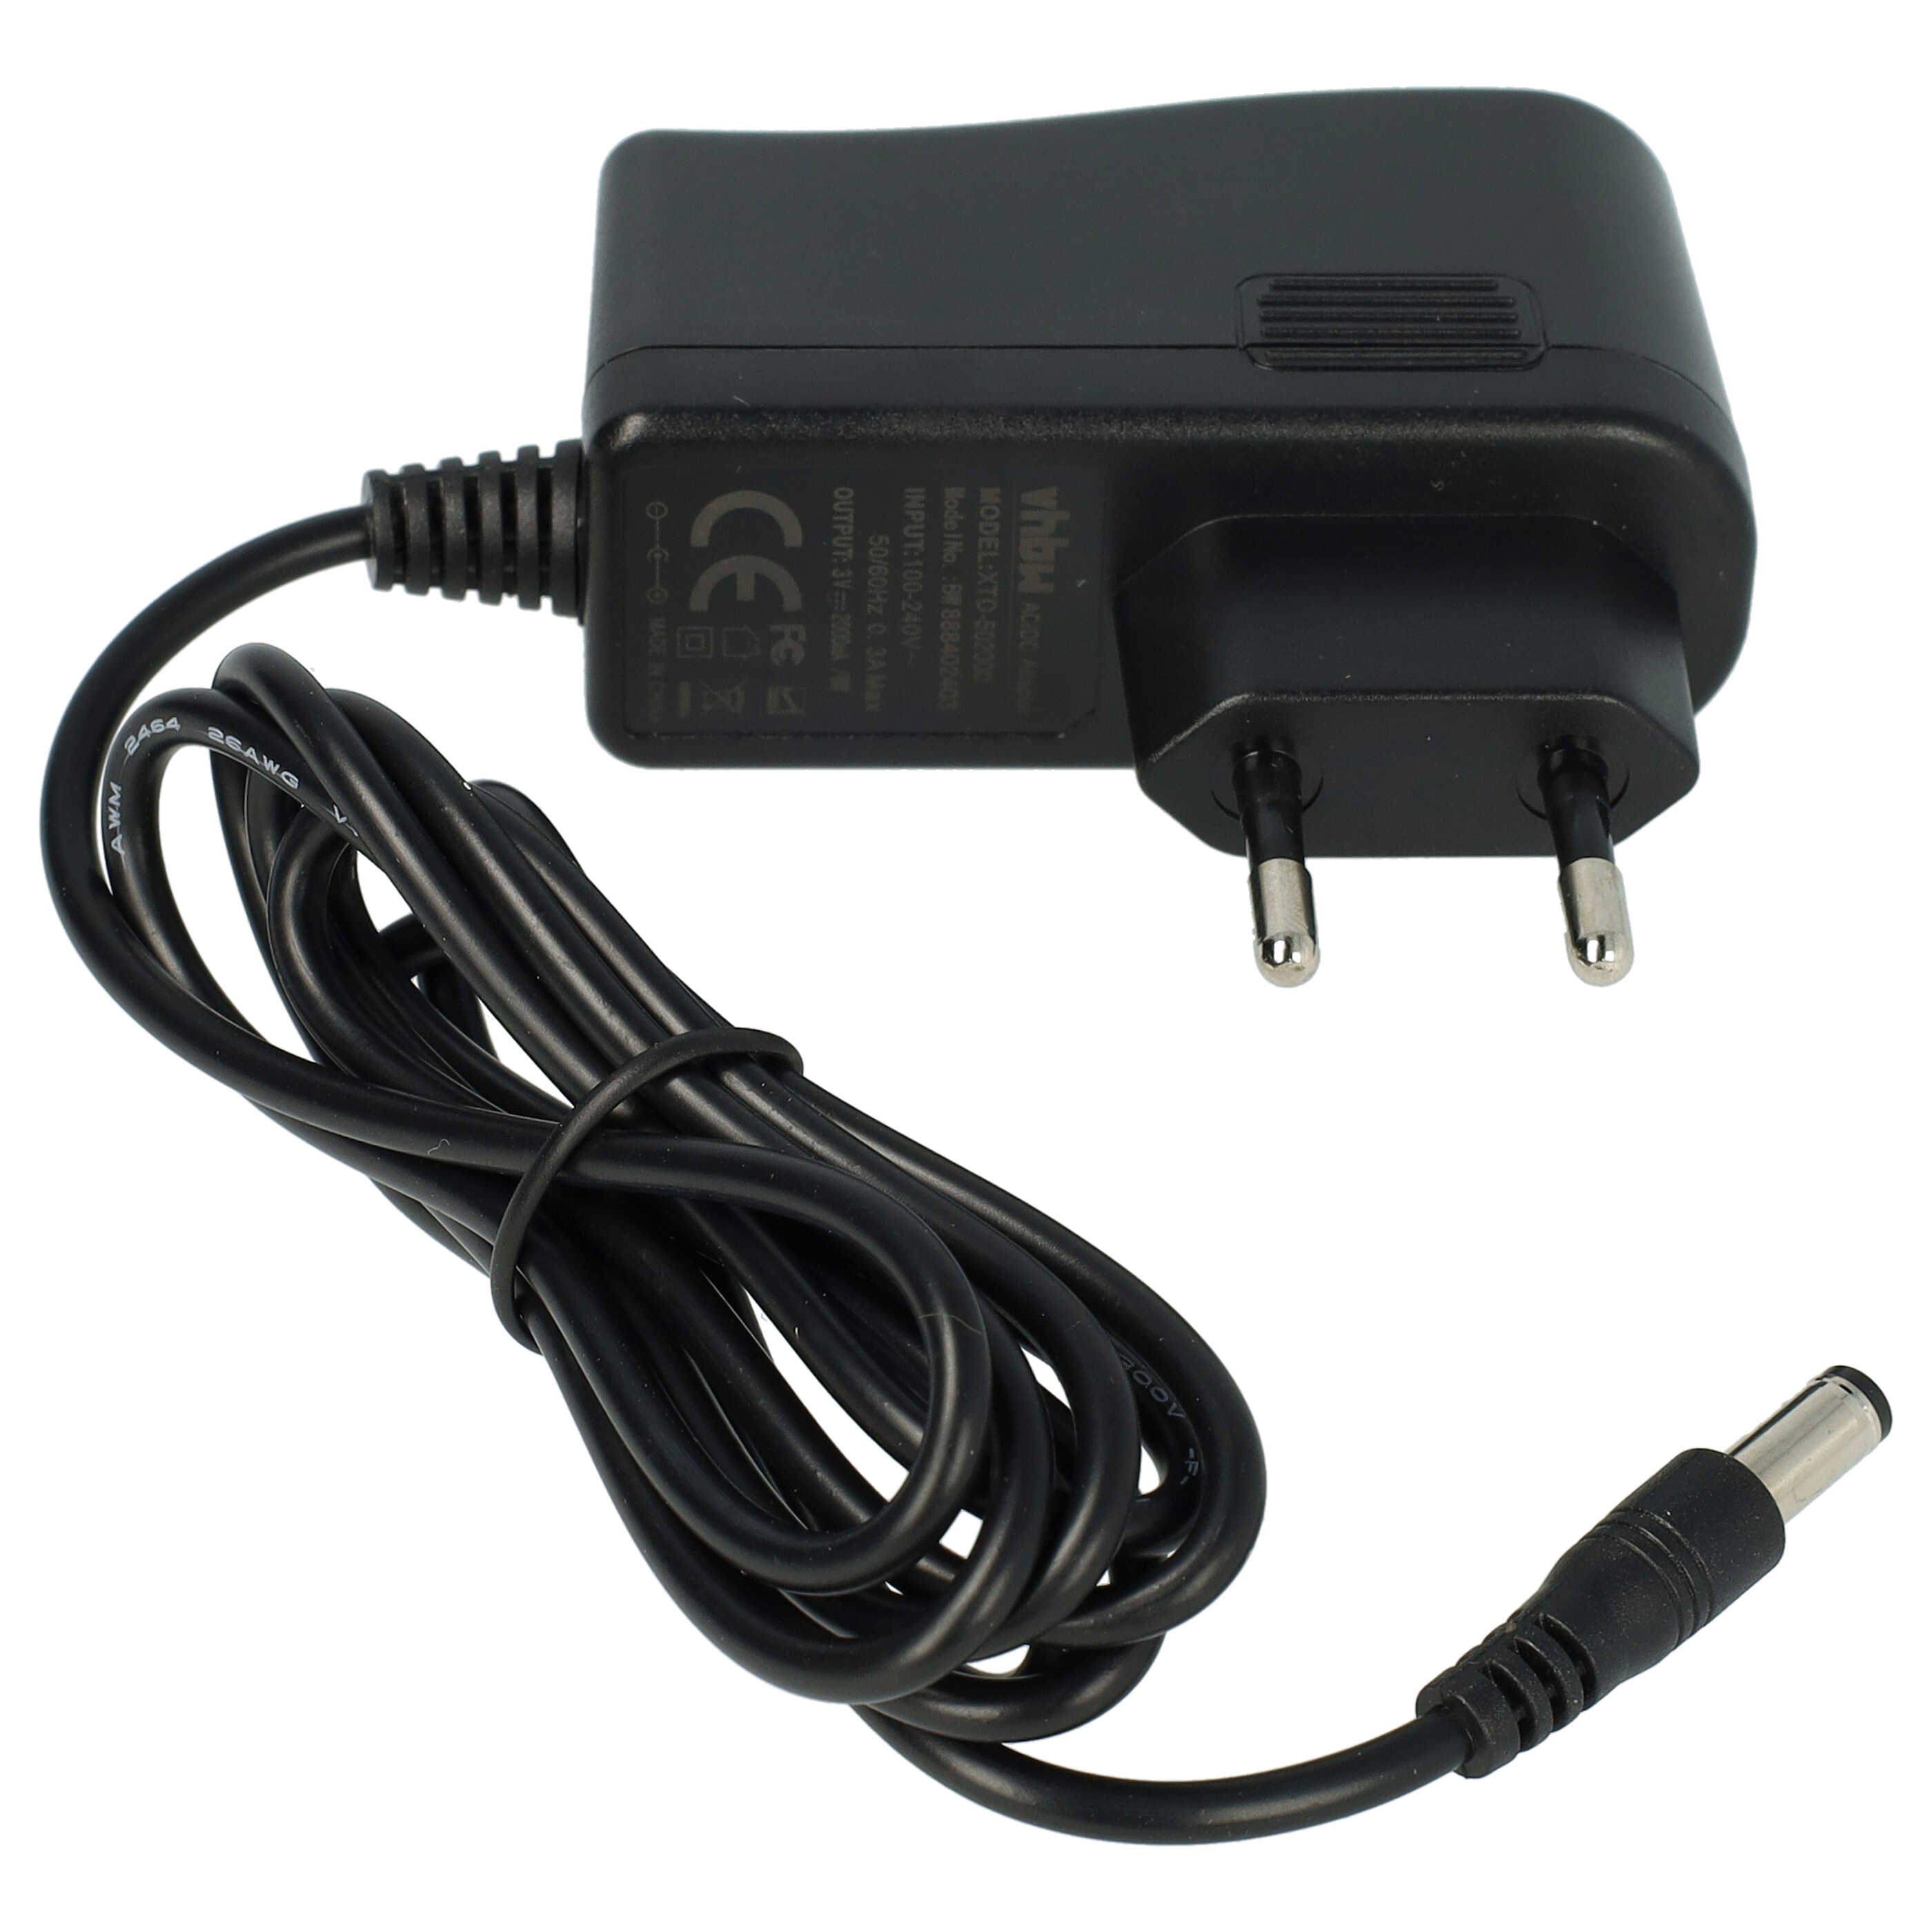 Mains Power Adapter with 5.5 x 2.5 mm Plug suitable for various Electric Devices - 3 V, 2 A